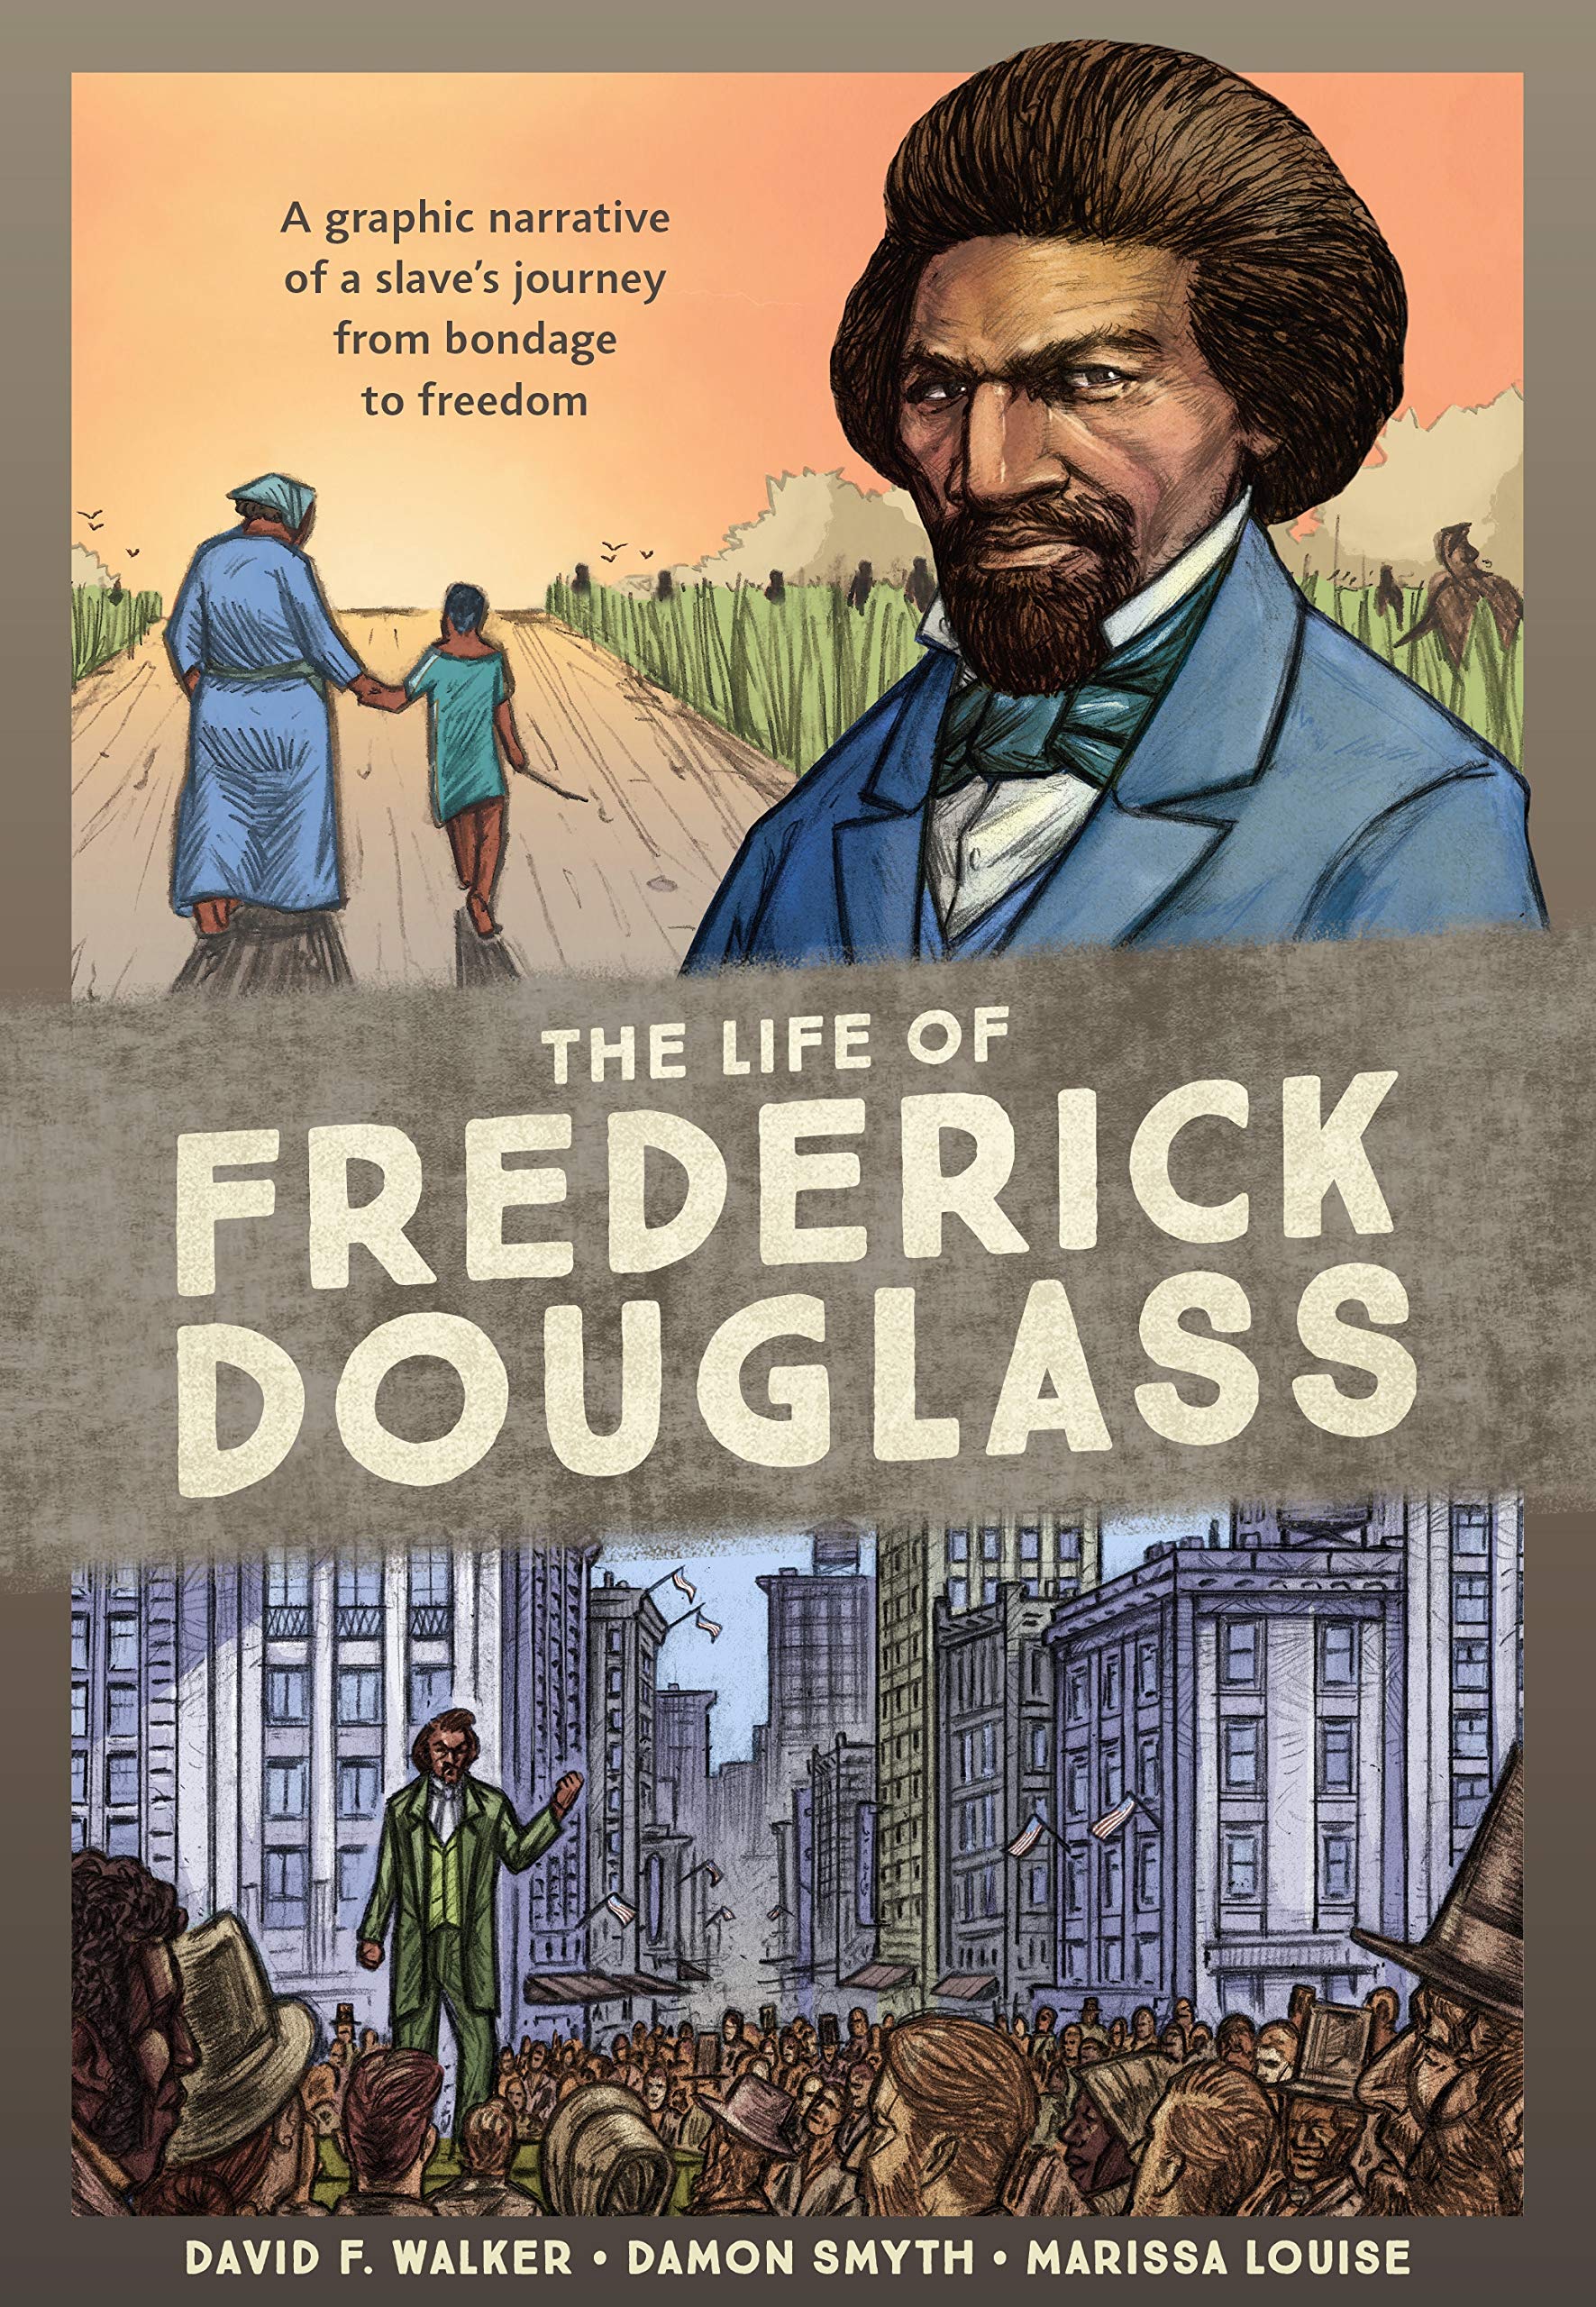 2020 Great Graphic Novels for Teens: The Life of Frederick Douglass